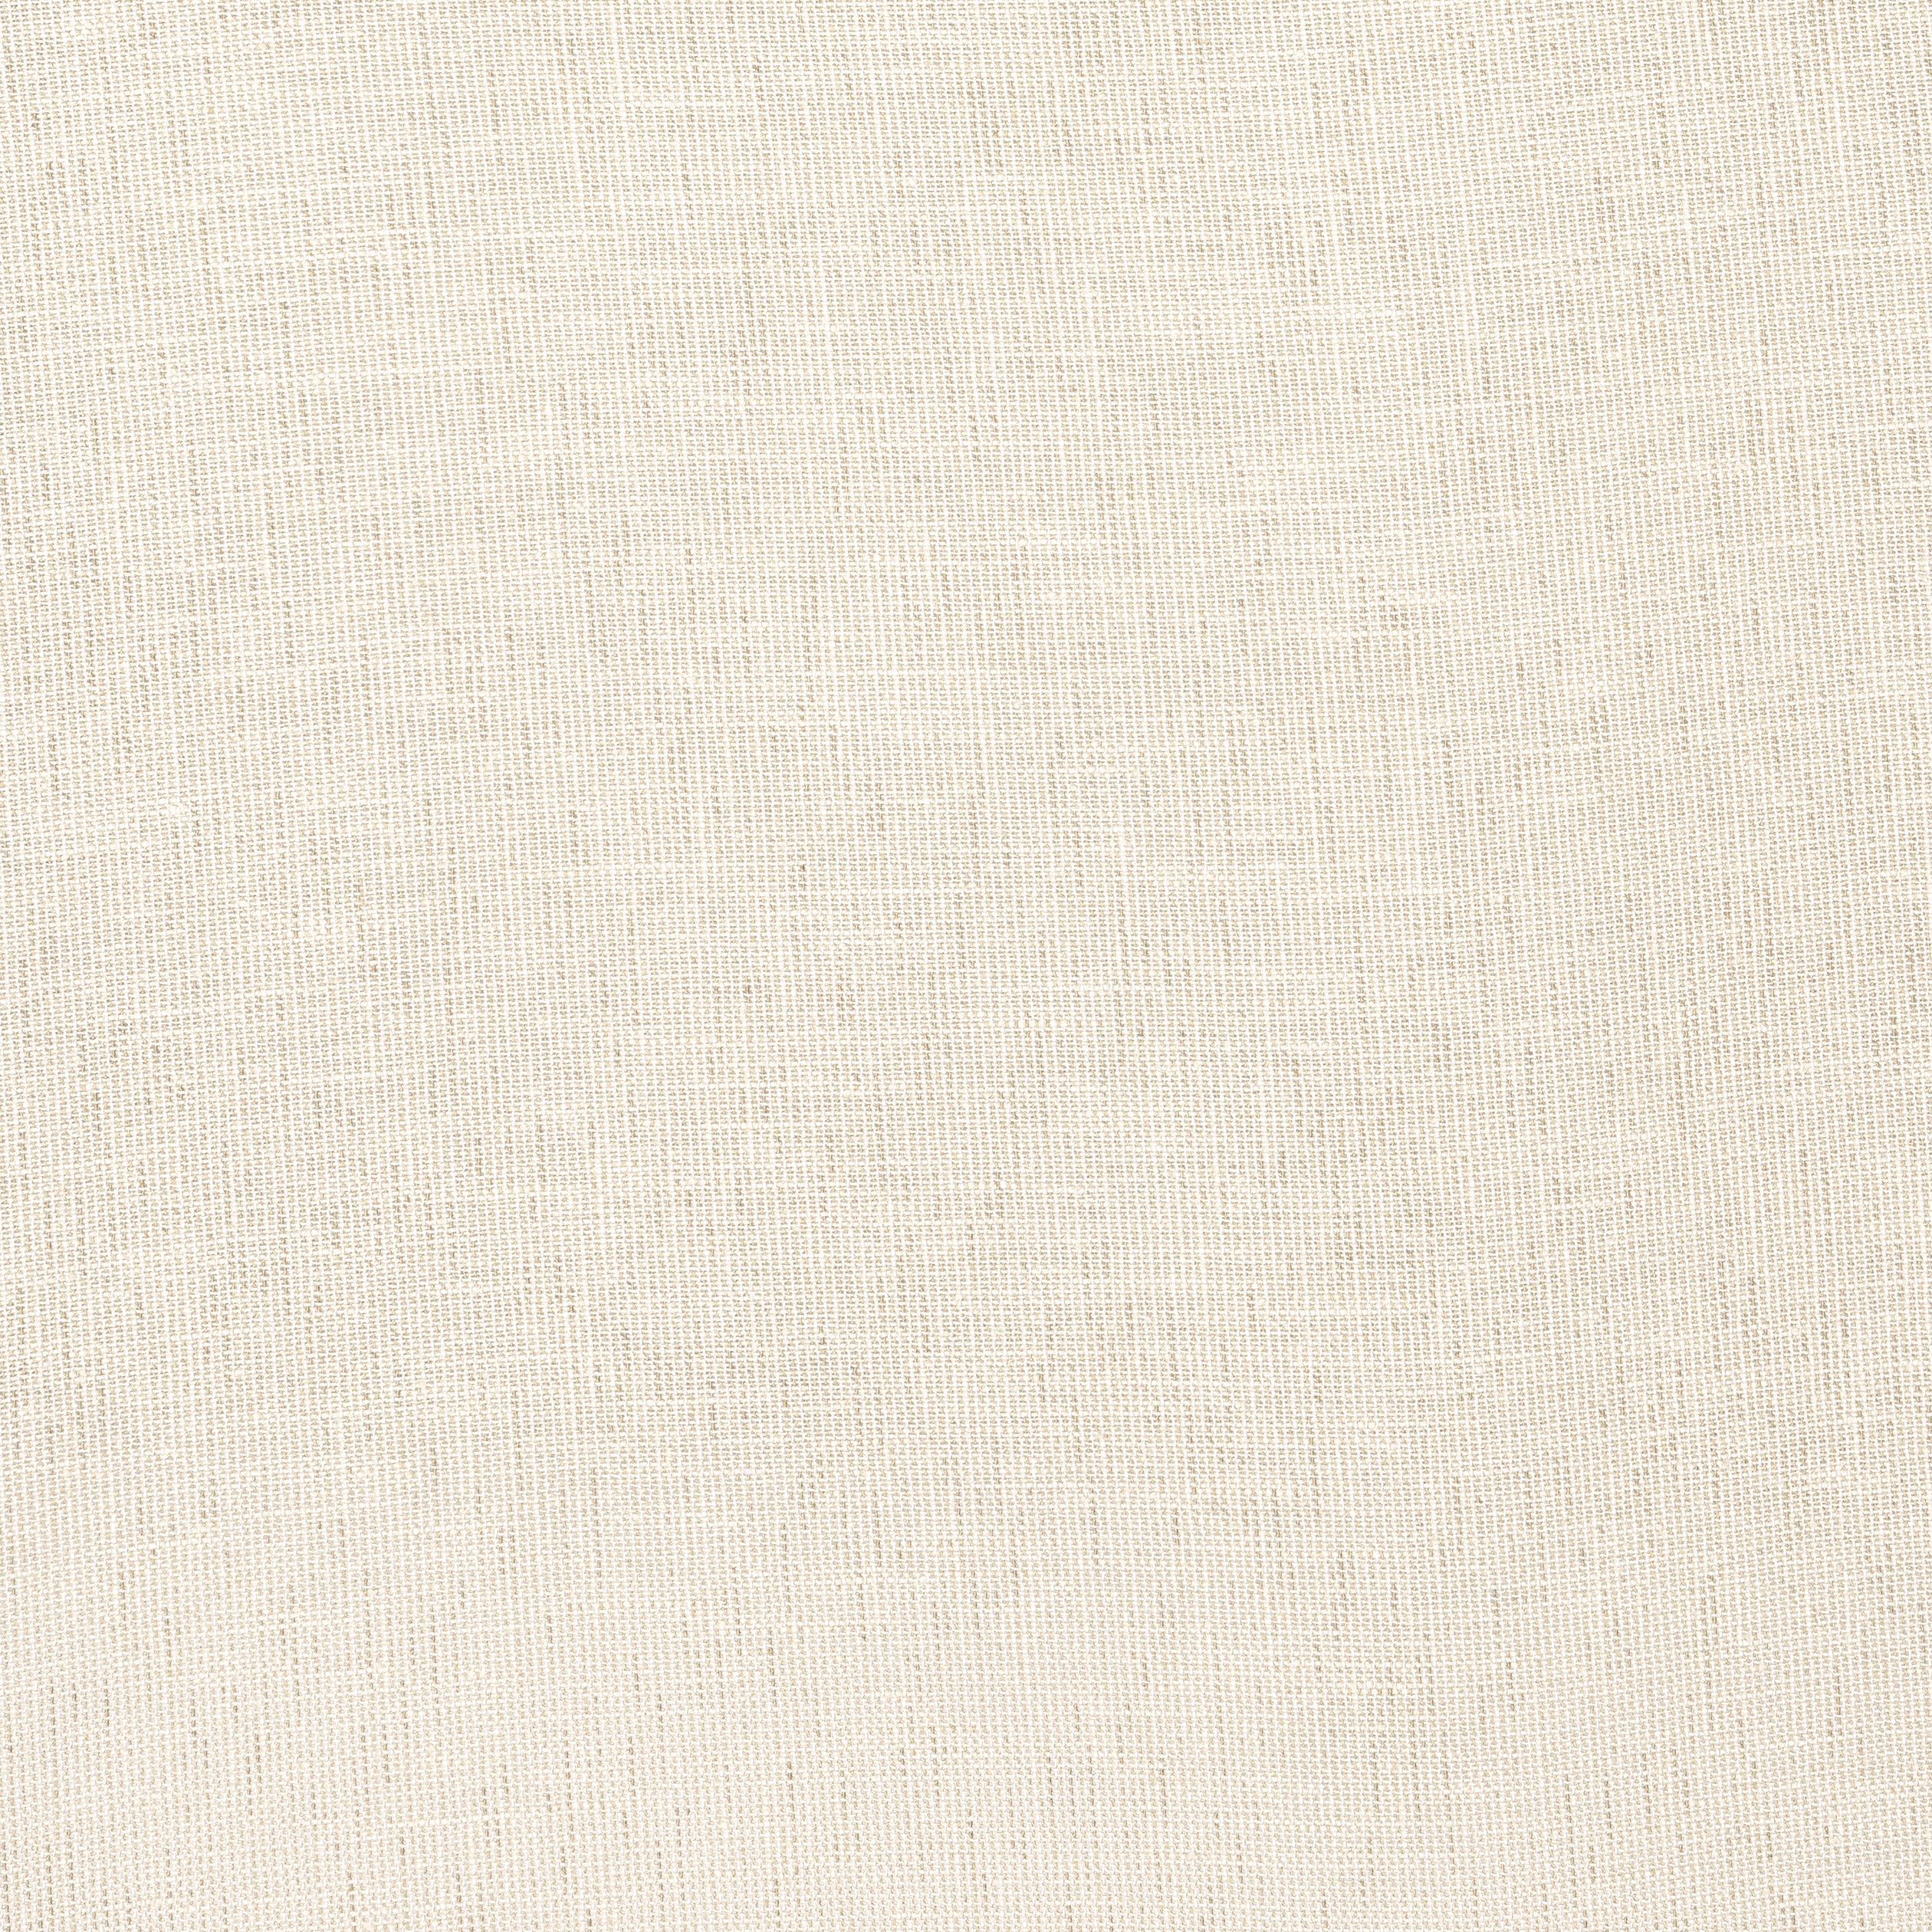 Ottawa fabric in linen color - pattern number FWW8245 - by Thibaut in the Aura collection